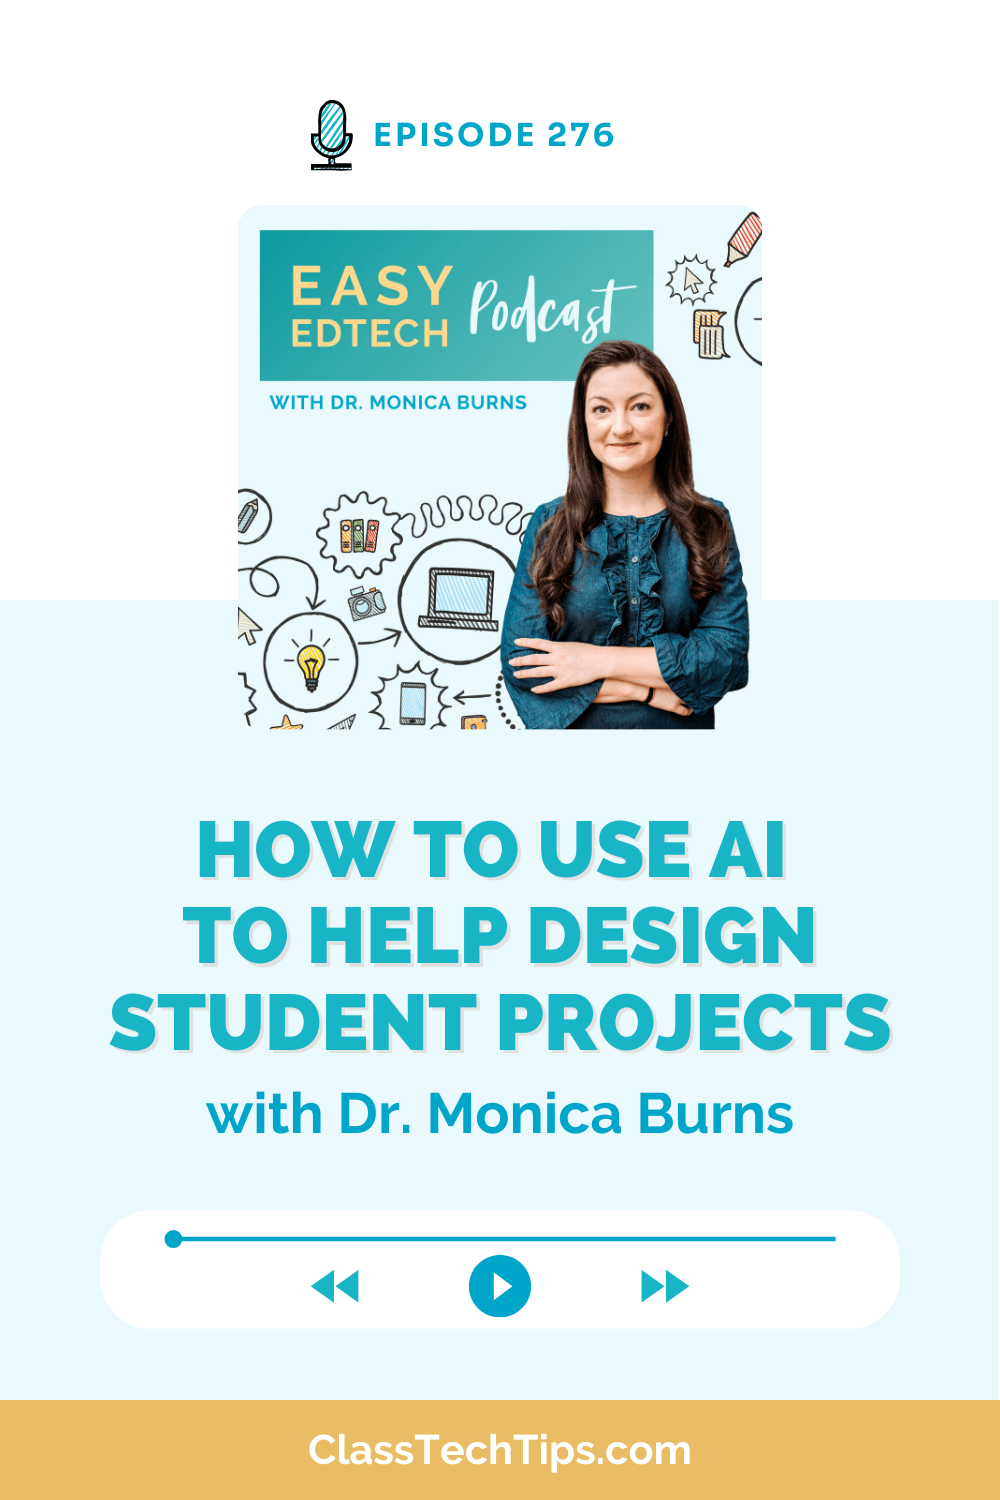 Discover strategies for using AI to design student projects in Episode 276 of the Easy EdTech Podcast. Dr. Monica Burns shares insights on maximizing creativity and creating engaging student experiences.